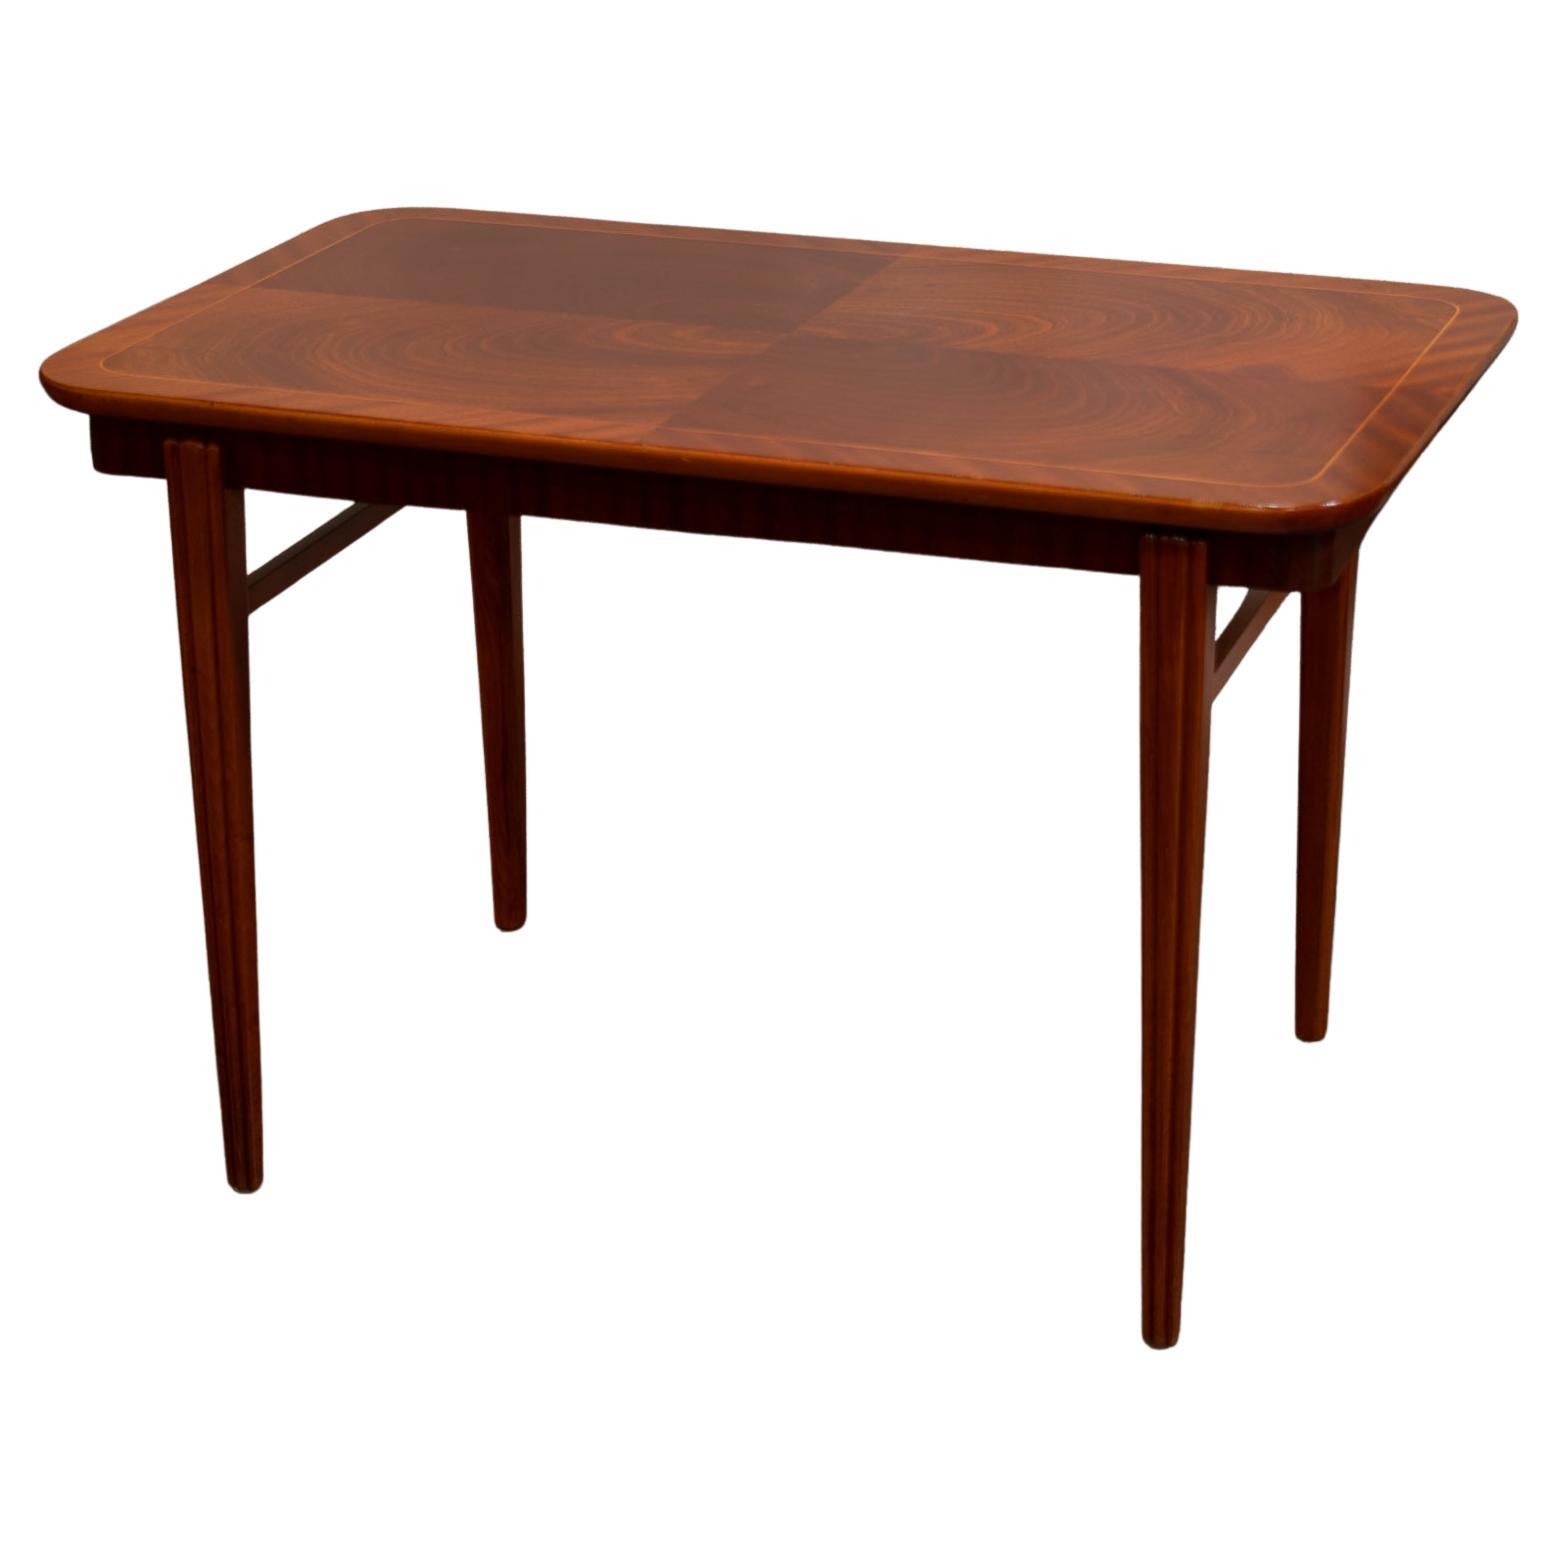 Swedish Crotch Mahogany Mid-Century Modern End Table For Sale